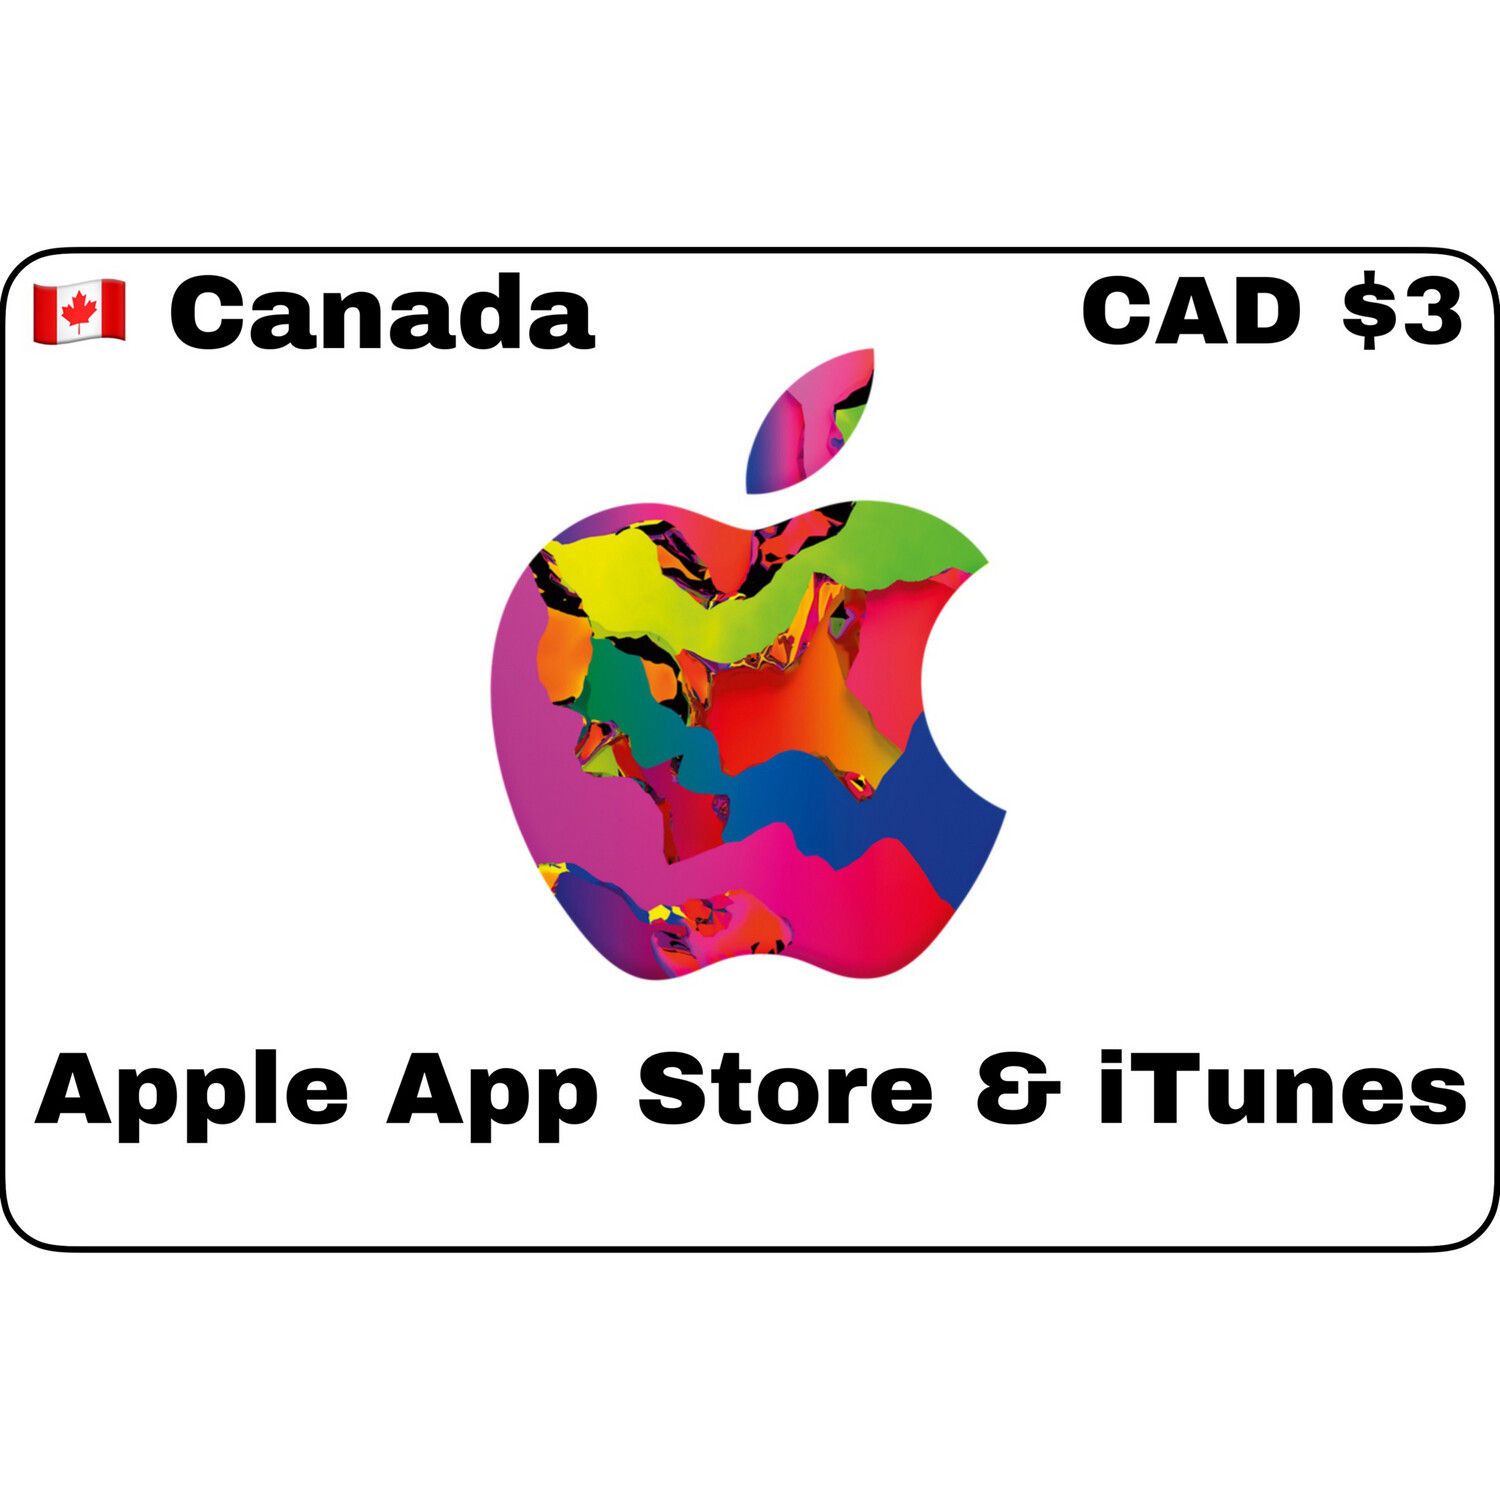 Apple iTunes Gift Card Canada CAD $3